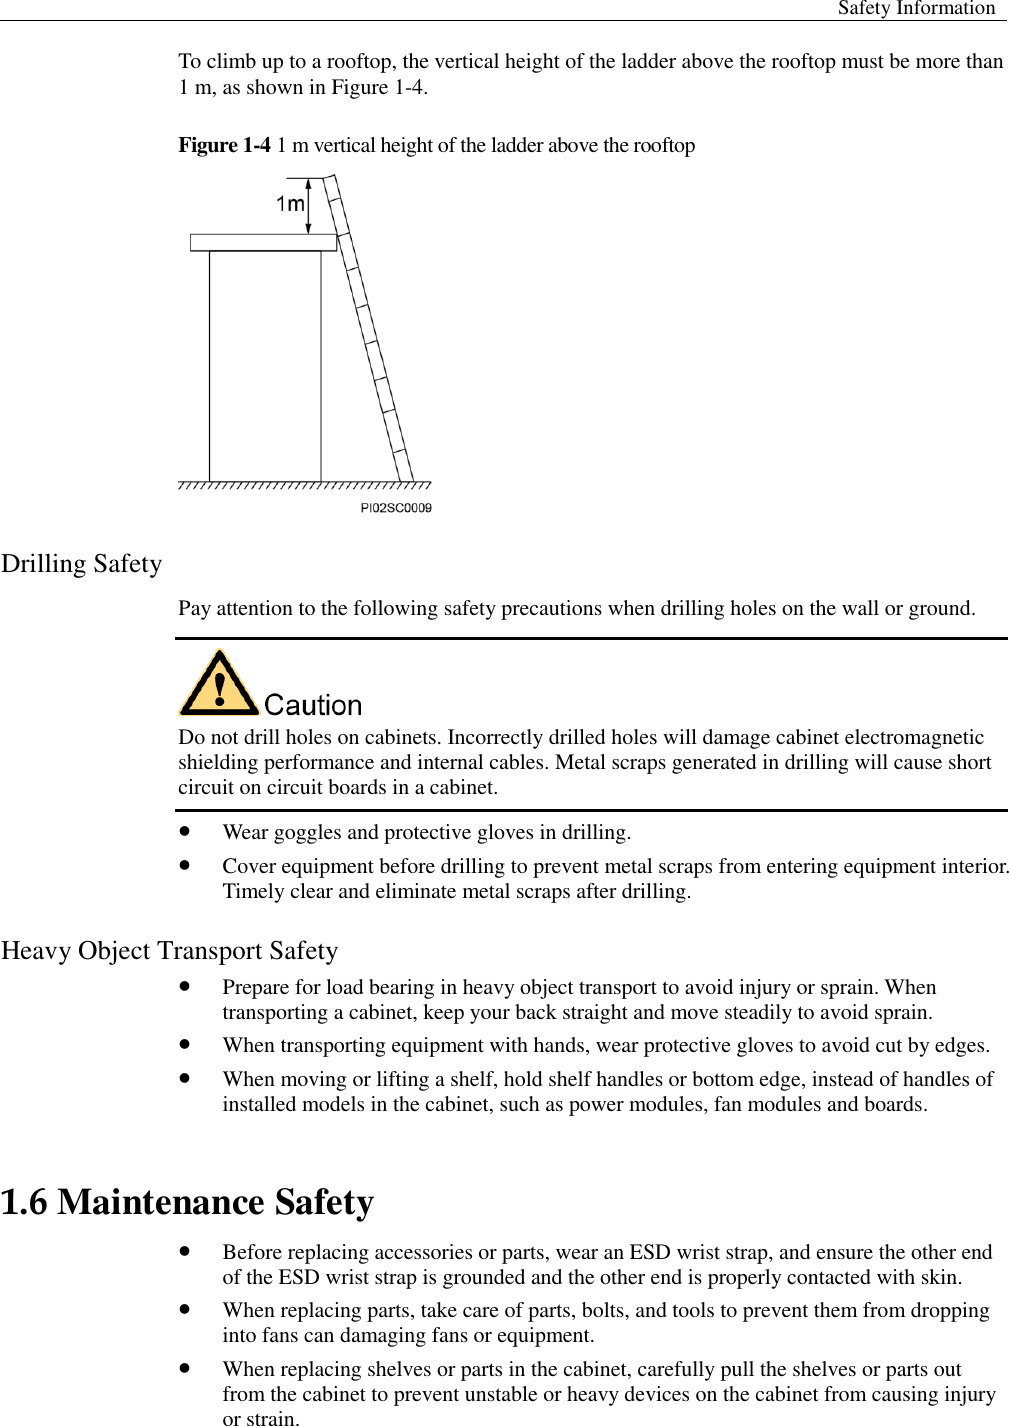  Safety Information  To climb up to a rooftop, the vertical height of the ladder above the rooftop must be more than 1 m, as shown in Figure 1-4.   Figure 1-4 1 m vertical height of the ladder above the rooftop  Drilling Safety Pay attention to the following safety precautions when drilling holes on the wall or ground.    Do not drill holes on cabinets. Incorrectly drilled holes will damage cabinet electromagnetic shielding performance and internal cables. Metal scraps generated in drilling will cause short circuit on circuit boards in a cabinet.    Wear goggles and protective gloves in drilling.    Cover equipment before drilling to prevent metal scraps from entering equipment interior. Timely clear and eliminate metal scraps after drilling.   Heavy Object Transport Safety    Prepare for load bearing in heavy object transport to avoid injury or sprain. When transporting a cabinet, keep your back straight and move steadily to avoid sprain.    When transporting equipment with hands, wear protective gloves to avoid cut by edges.    When moving or lifting a shelf, hold shelf handles or bottom edge, instead of handles of installed models in the cabinet, such as power modules, fan modules and boards. 1.6 Maintenance Safety    Before replacing accessories or parts, wear an ESD wrist strap, and ensure the other end of the ESD wrist strap is grounded and the other end is properly contacted with skin.    When replacing parts, take care of parts, bolts, and tools to prevent them from dropping into fans can damaging fans or equipment.    When replacing shelves or parts in the cabinet, carefully pull the shelves or parts out from the cabinet to prevent unstable or heavy devices on the cabinet from causing injury or strain.   